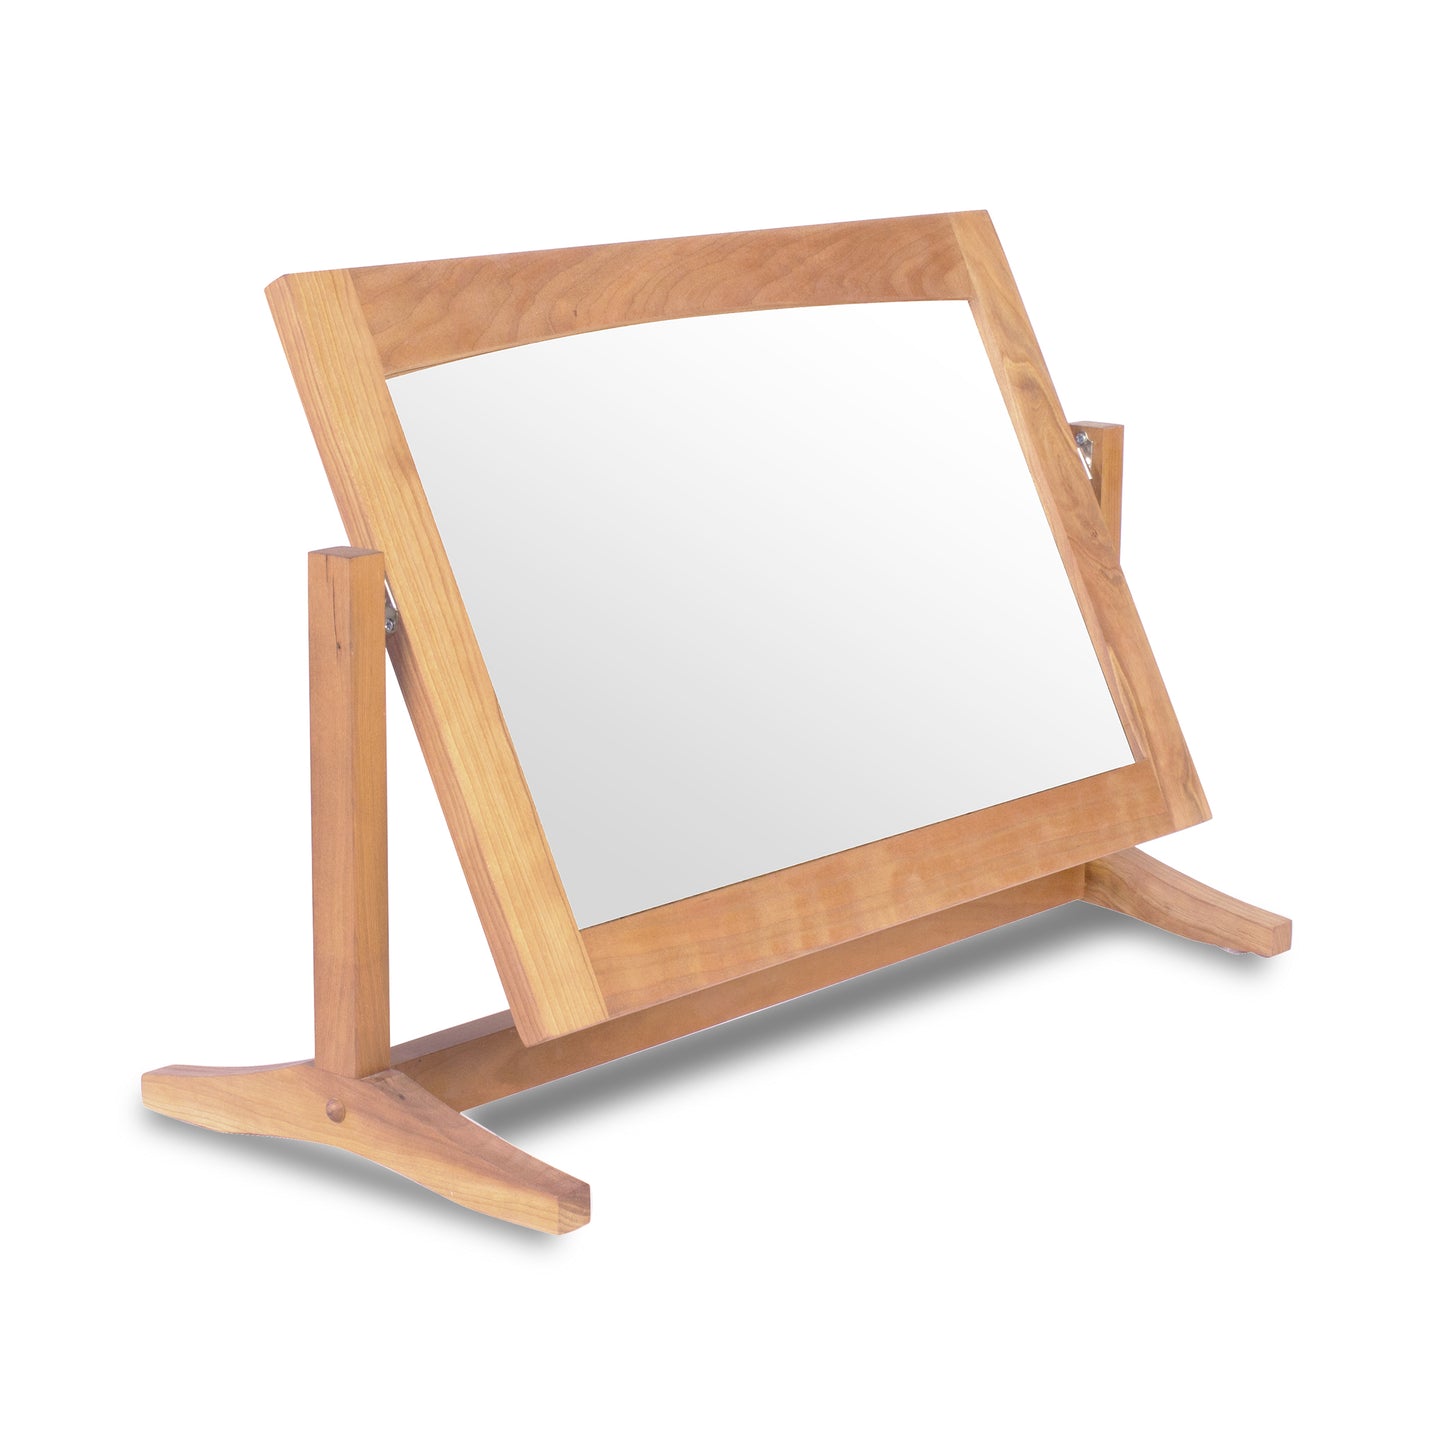 A handcrafted wooden stand with the New England Shaker Adjustable Dresser Mirror, sustainably harvested from solid woods and made in Vermont. (Brand: Lyndon Furniture)